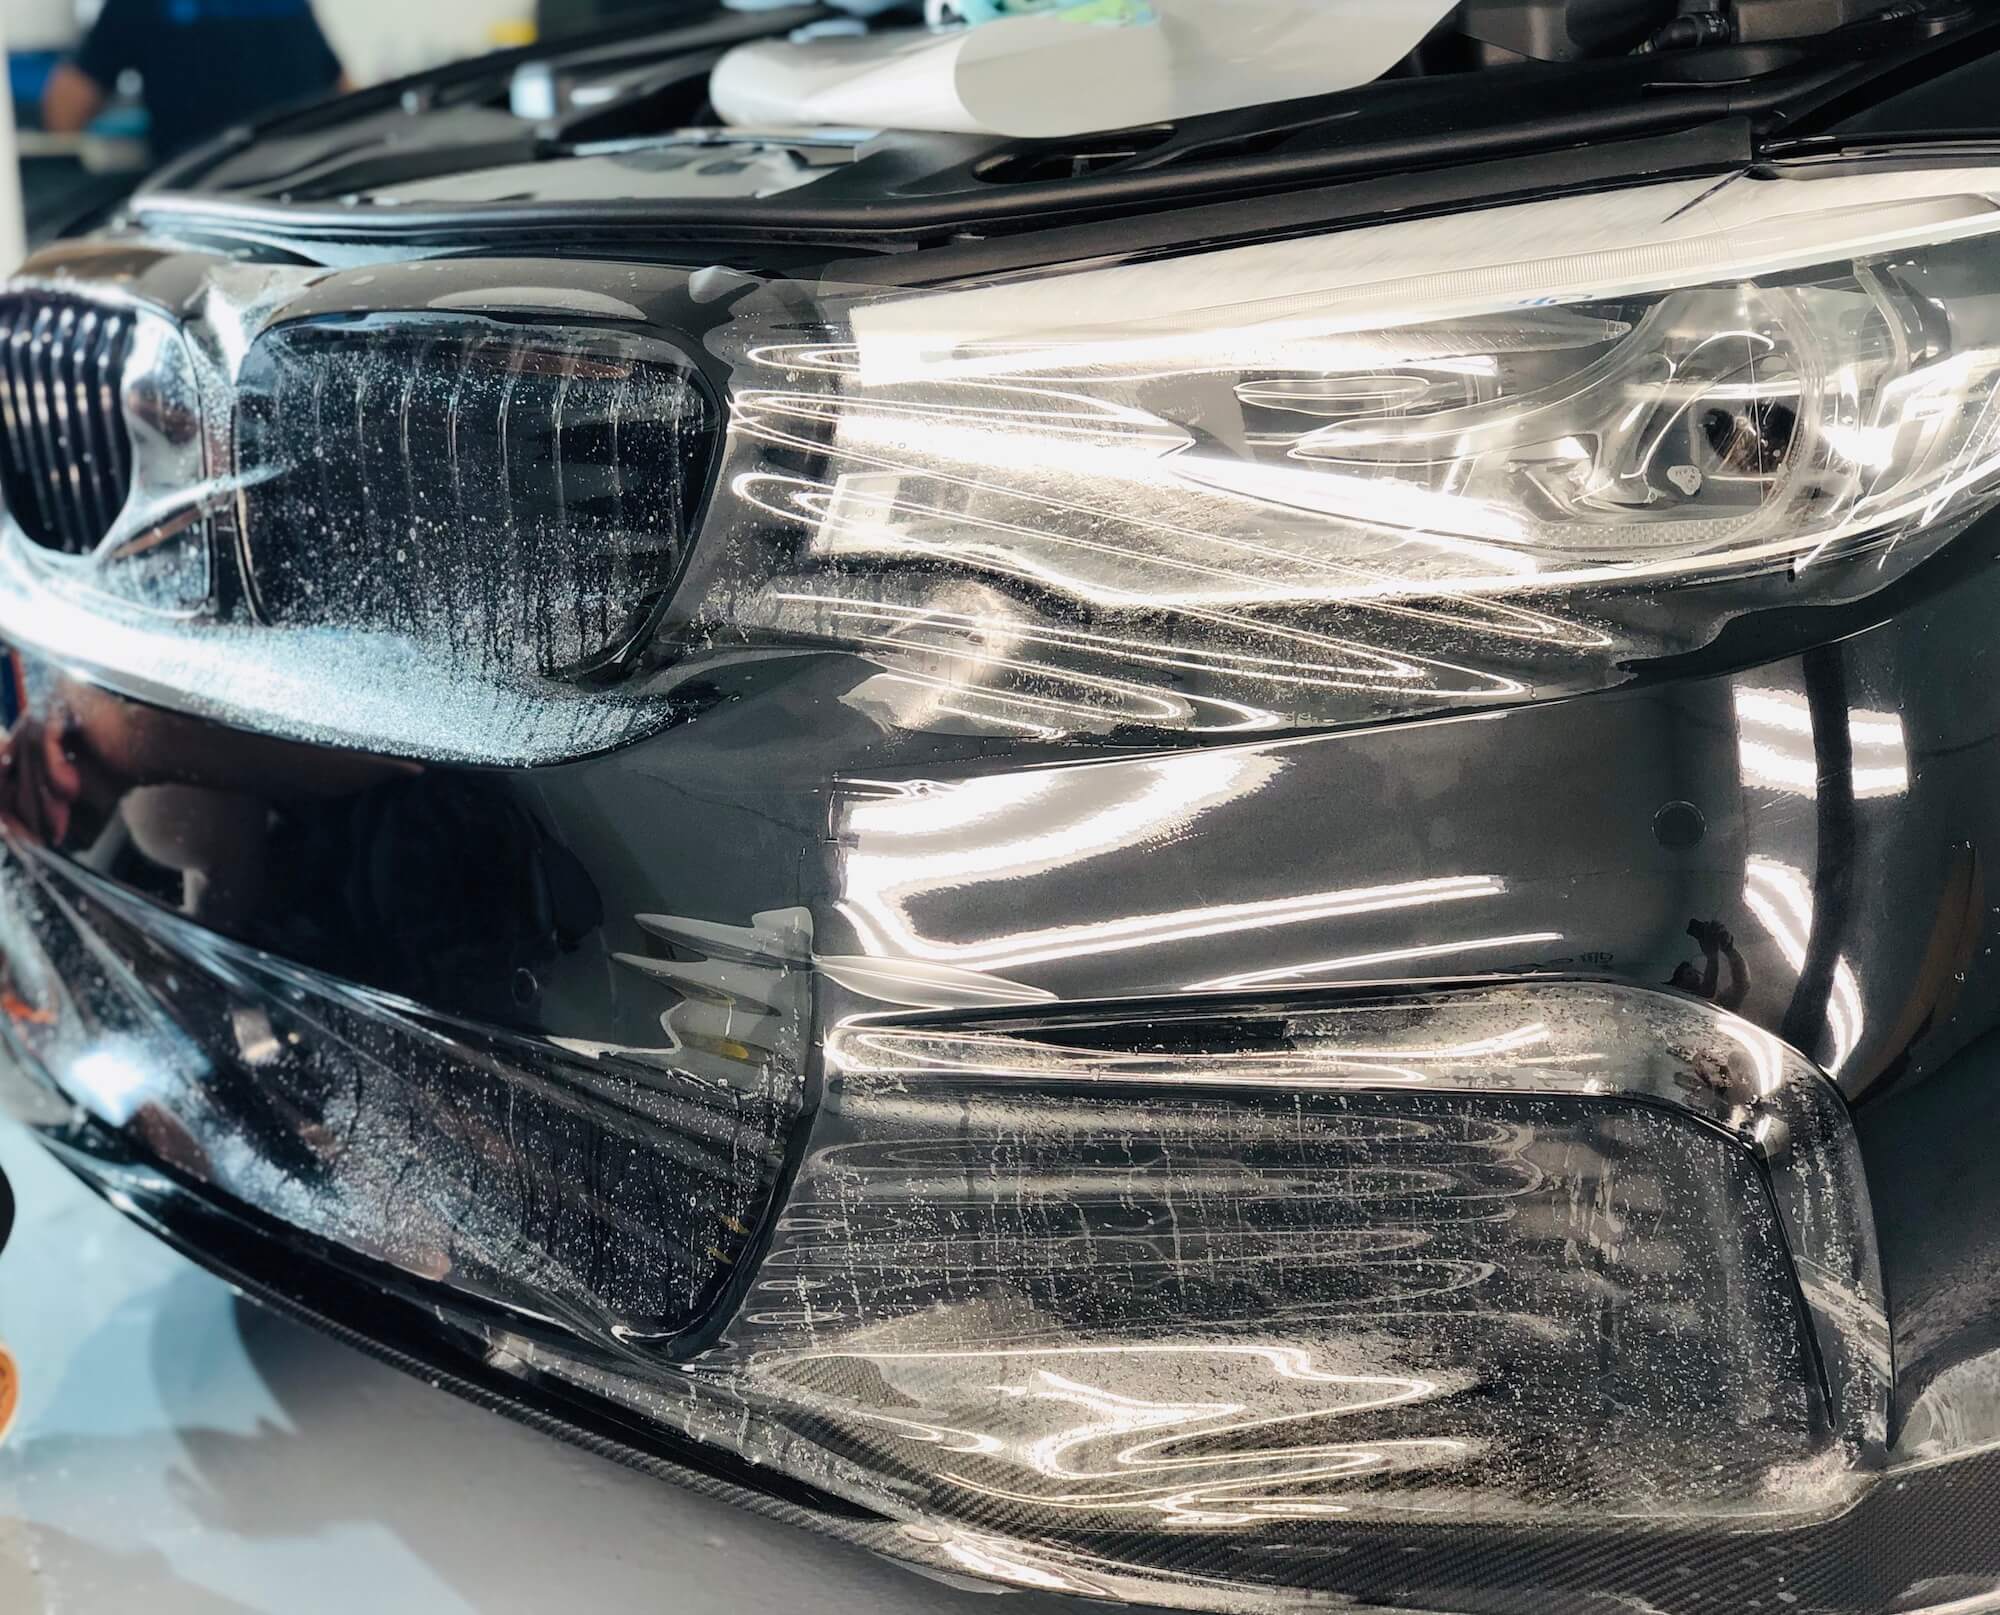 Where Can I Find Paint Protection Film Installation? - Car